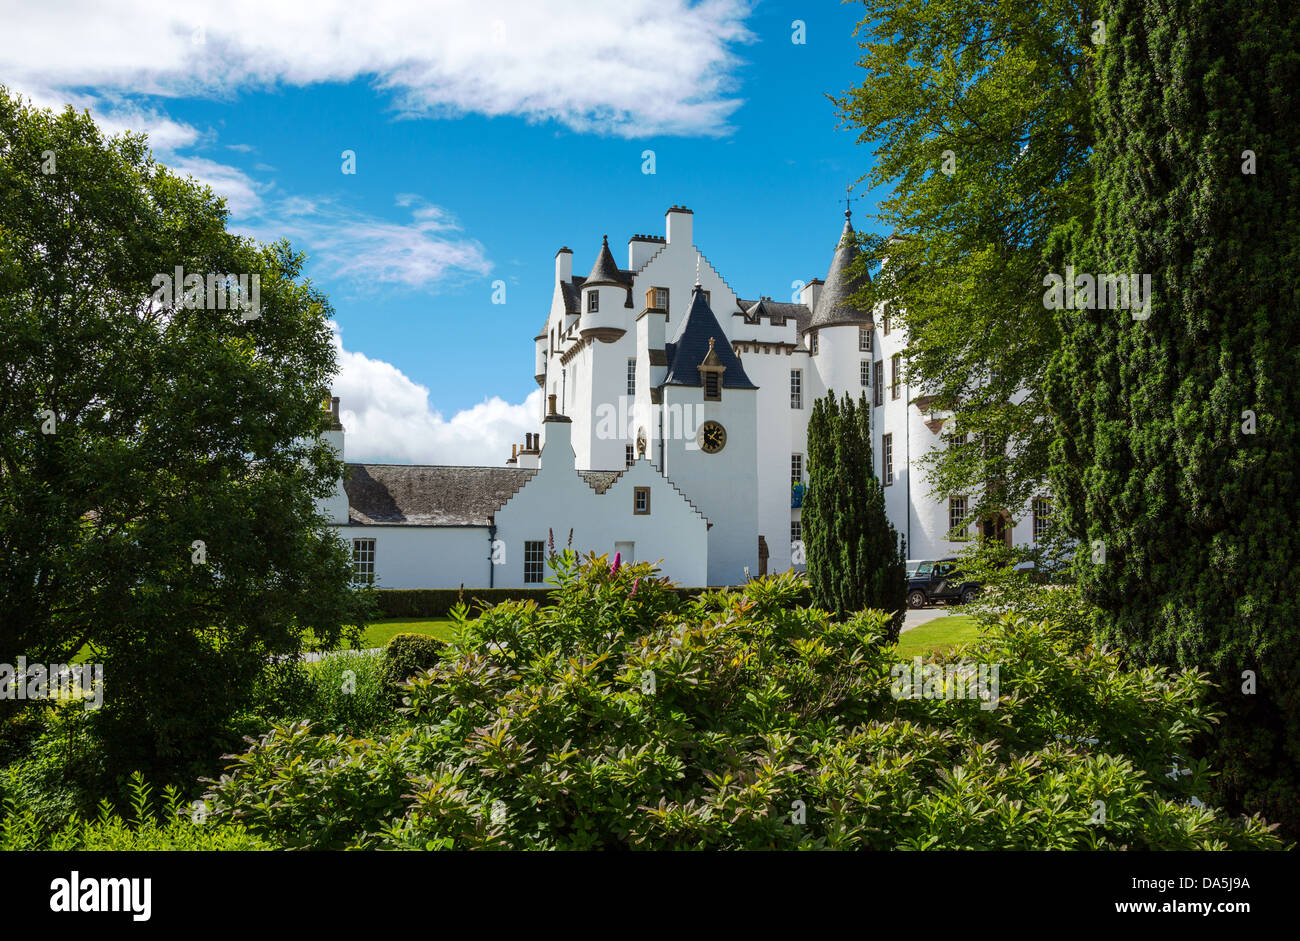 Europe Great Britain, Scotland, Perthshire, Blair Atholl, the Blair castle, home of the Duke of Athool, seen from the garden. Stock Photo